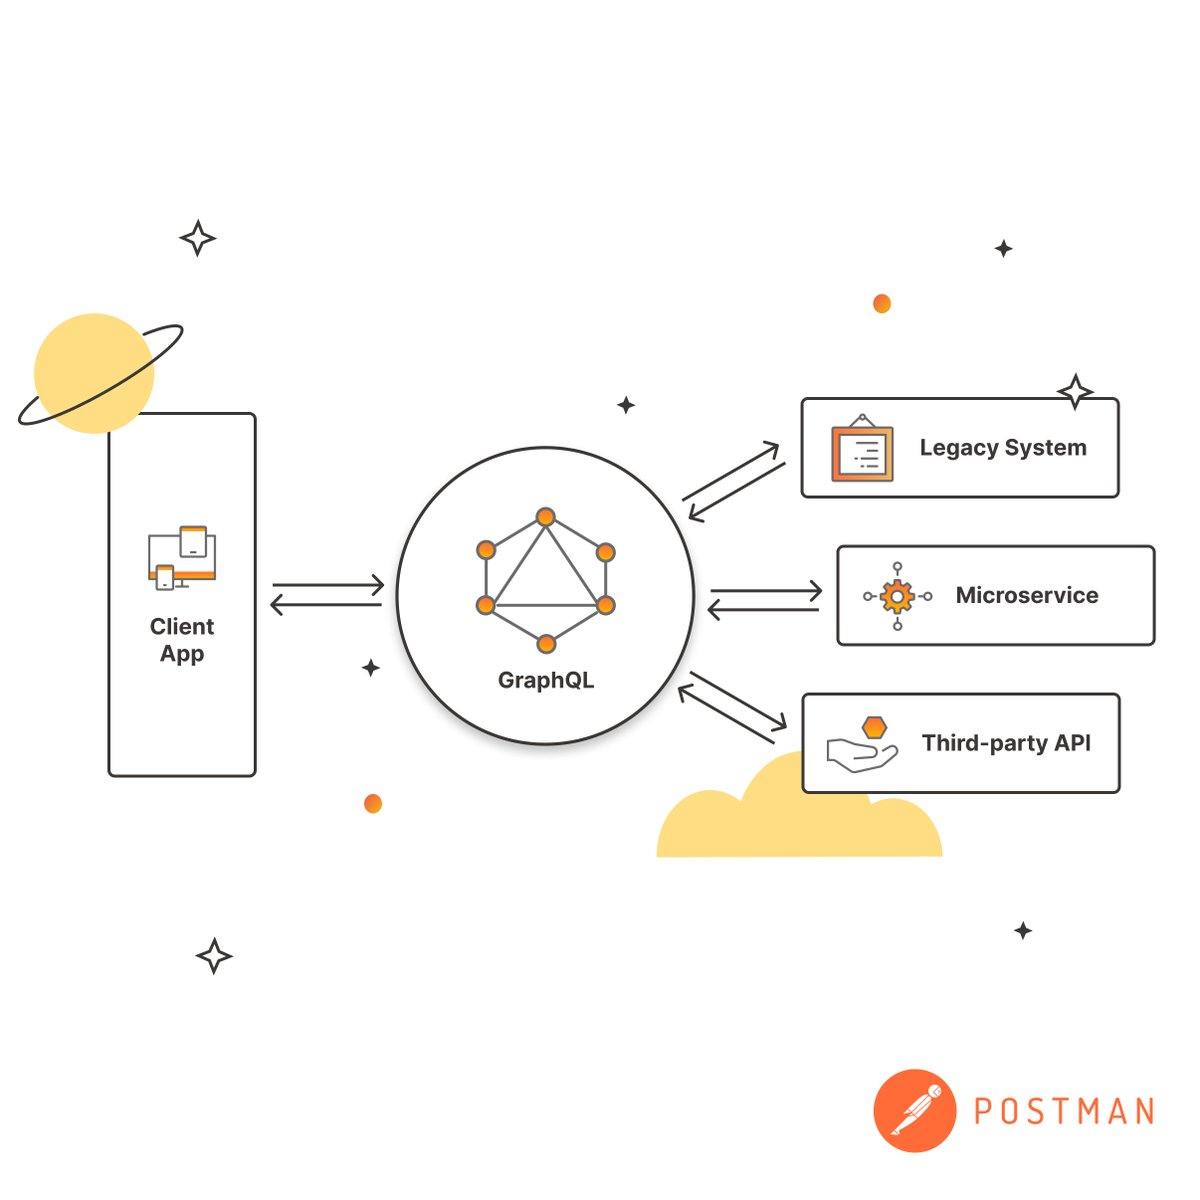 What can you do with Postman's #GraphQL client? 👾 ☑️ Explore GraphQL schemas easily ☑️ Create code-ready queries ☑️ View and analyze responses ☑️ Leverage pre-configured code snippets to quickly author tests for any GraphQL request ...and more! 🚀 postman.com/product/graphq…